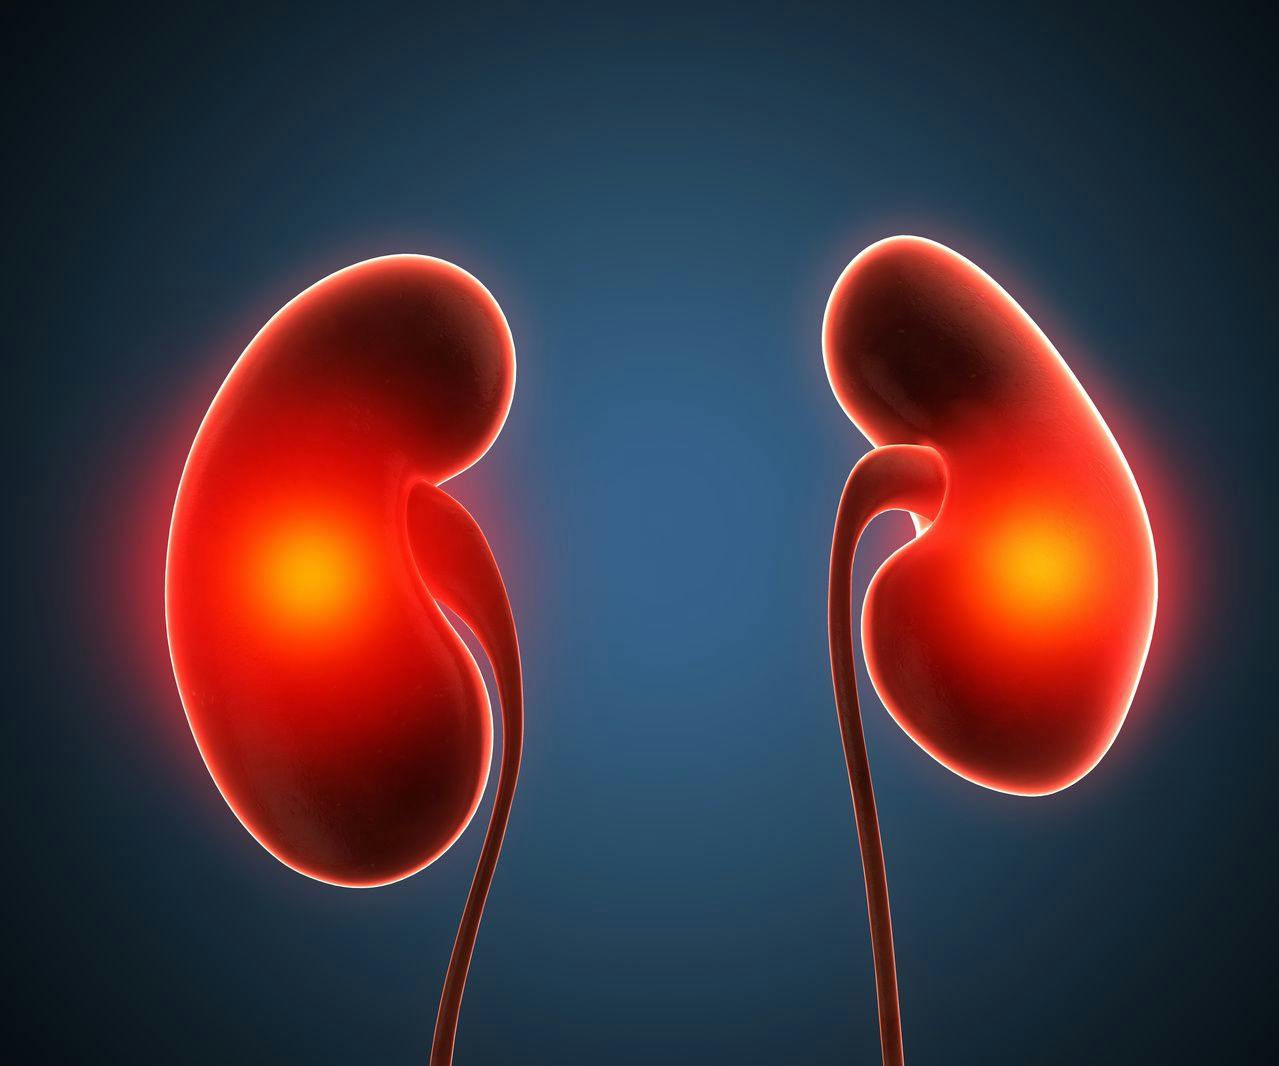 Study Probes Genomic Factors Affecting Outcomes in Advanced Renal Cancer